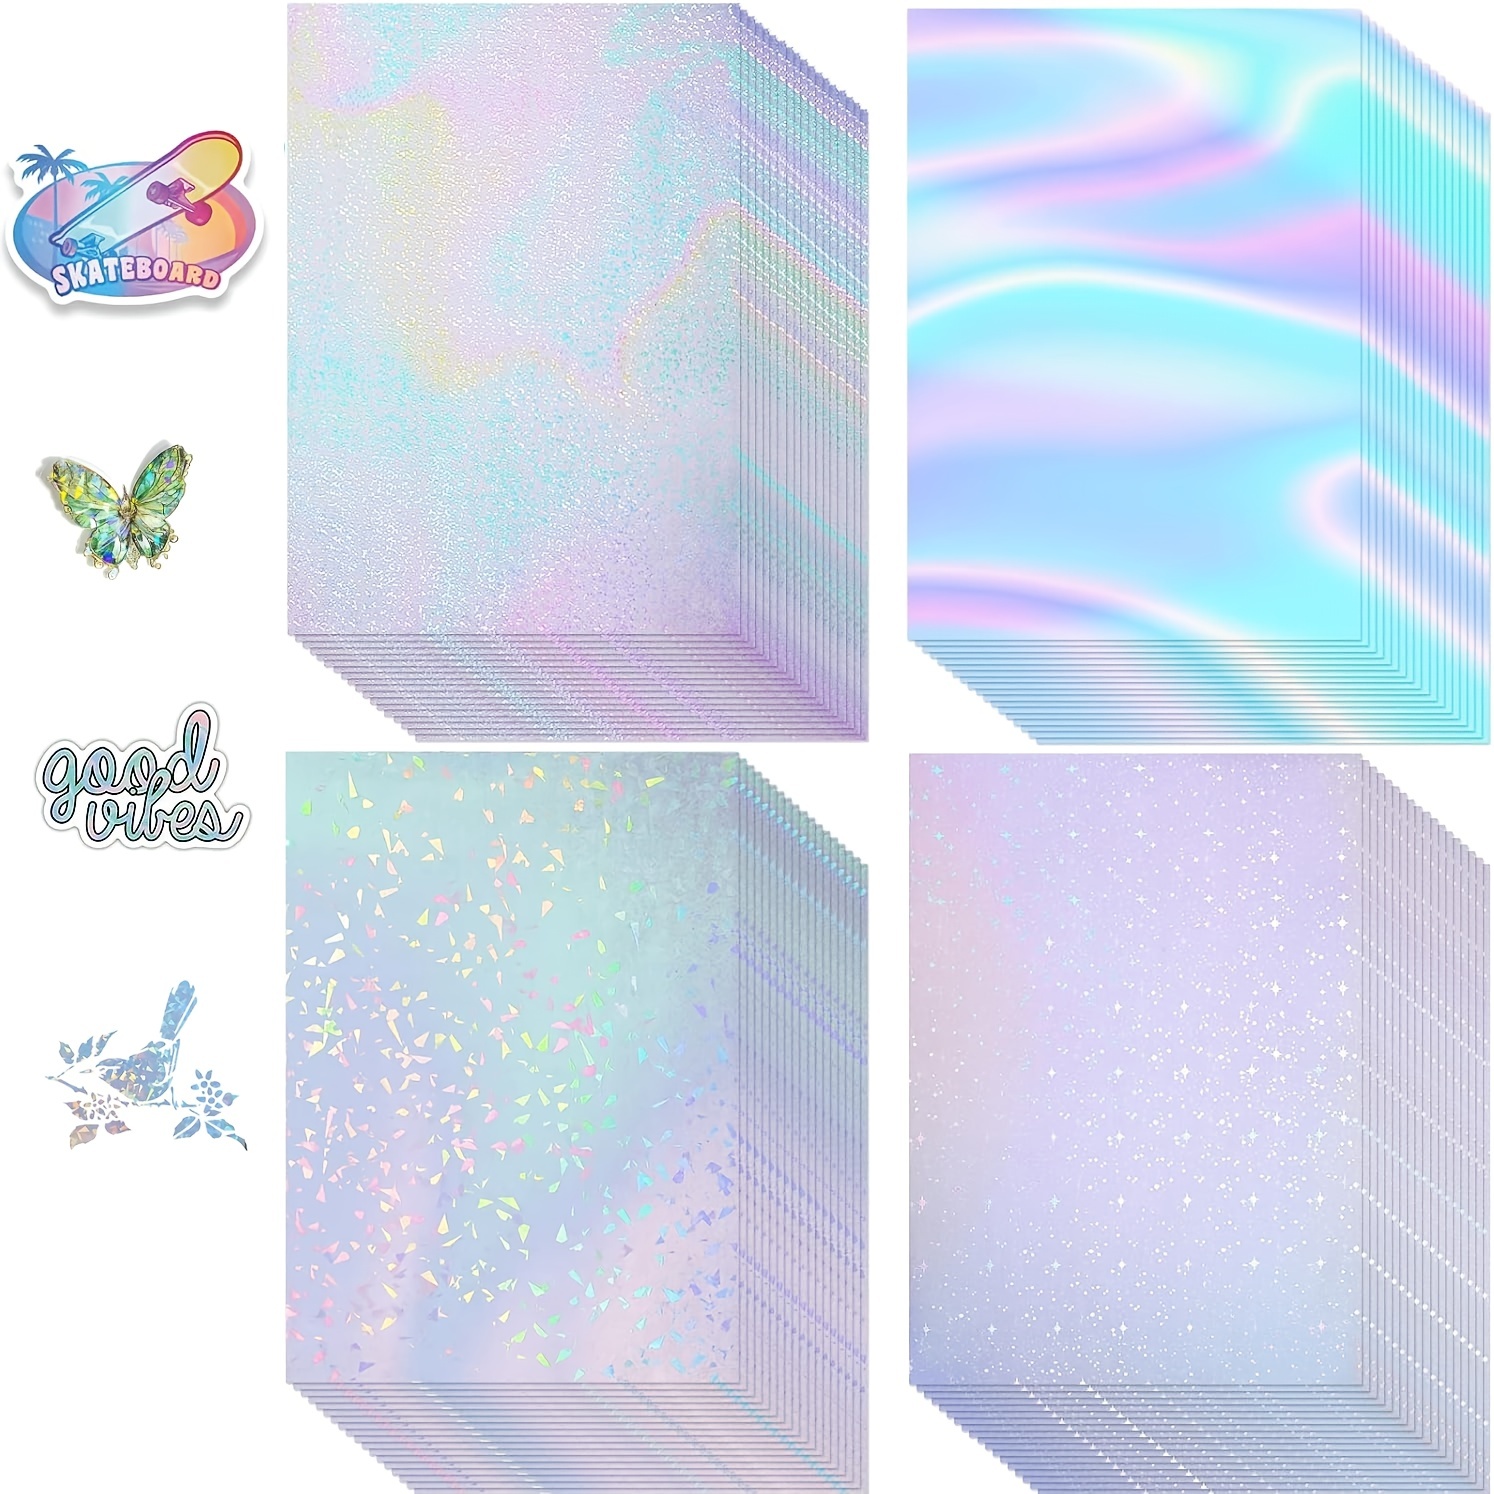 20Sheets Holographic Sticker Paper Clear A4 Vinyl Sticker Paper  Self-Adhesive Waterproof Transparent Film with Gem Spot Rainbow Star  Patterns, 11.7 x 8.3 Inch (Gem, Dot, Colorful, Star)